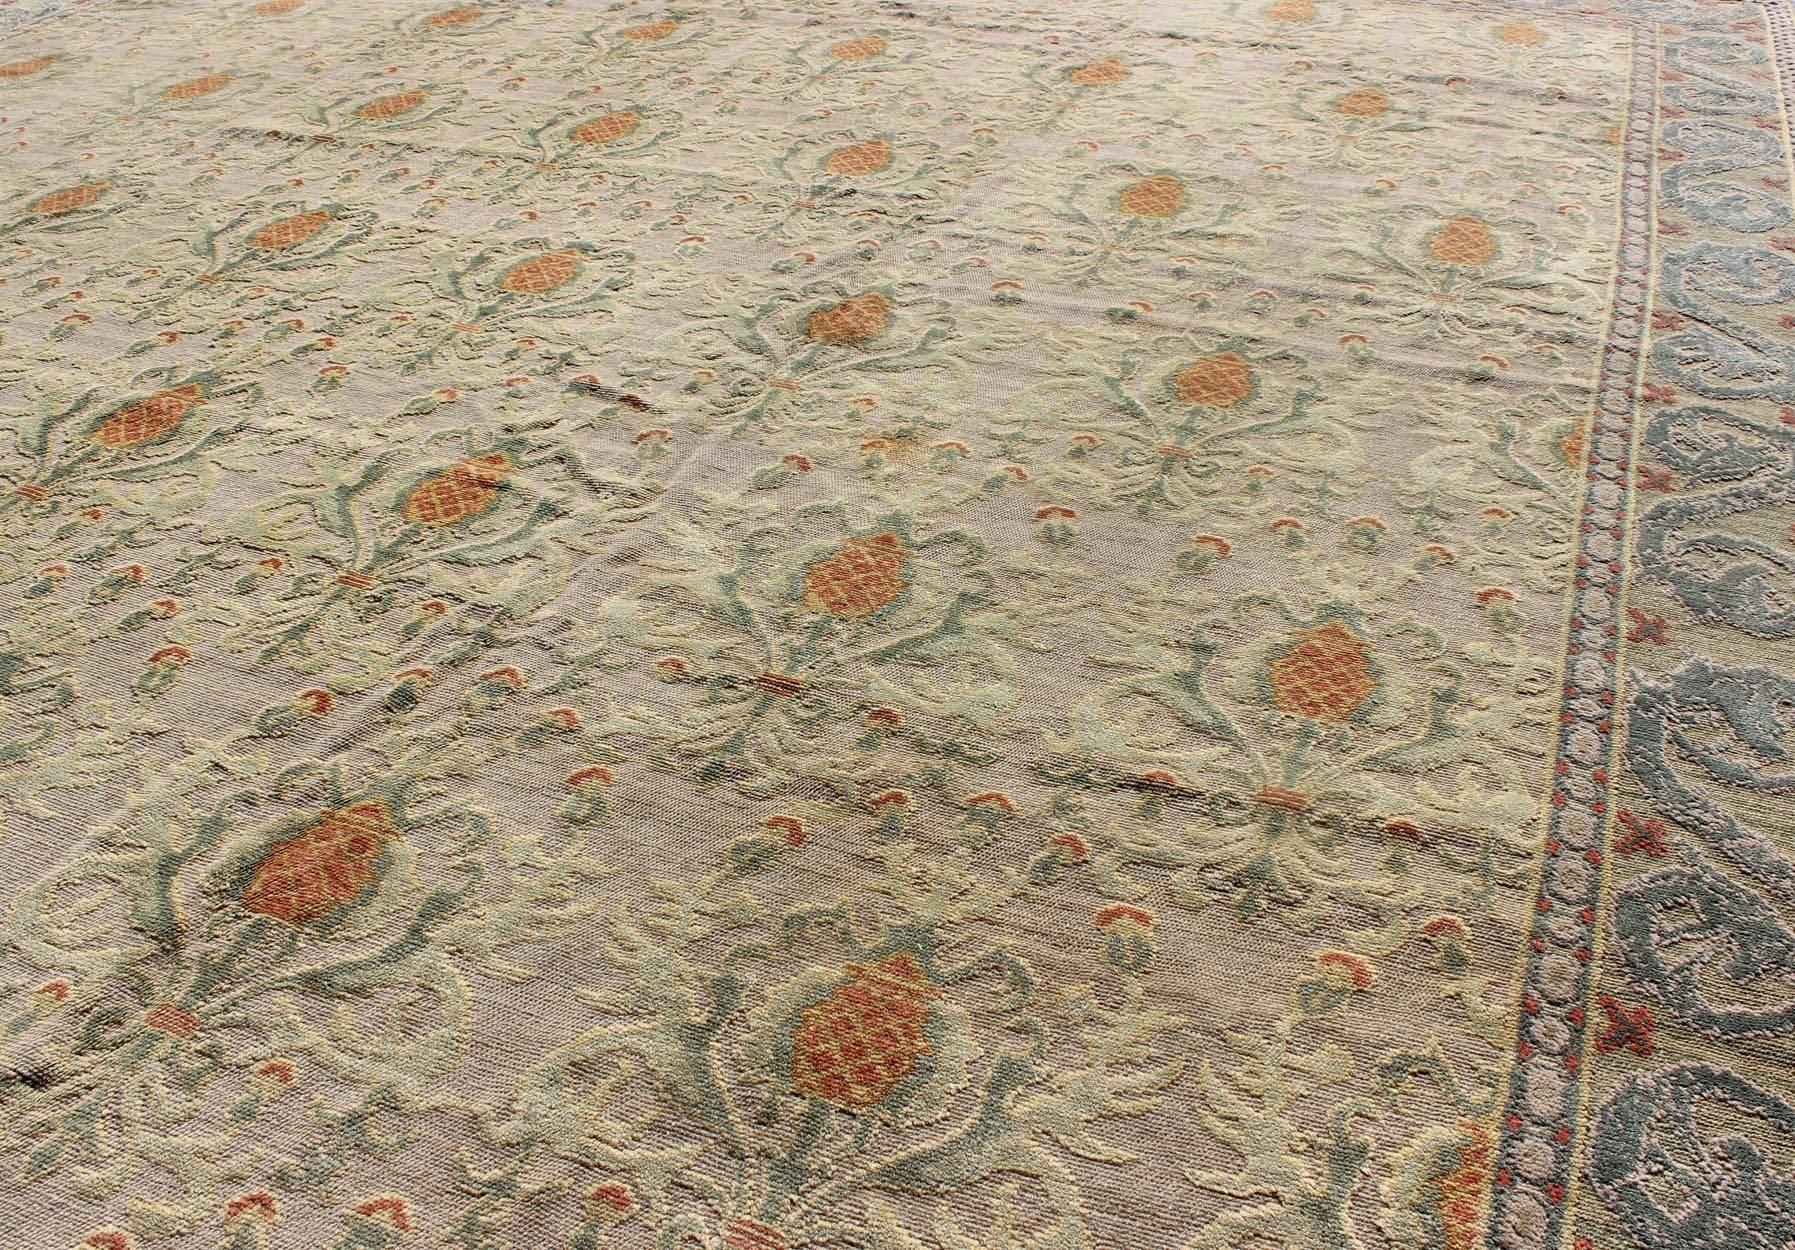 20th Century Square Sized Antique Spanish Carpet in Green, Orange and Gray/Blue